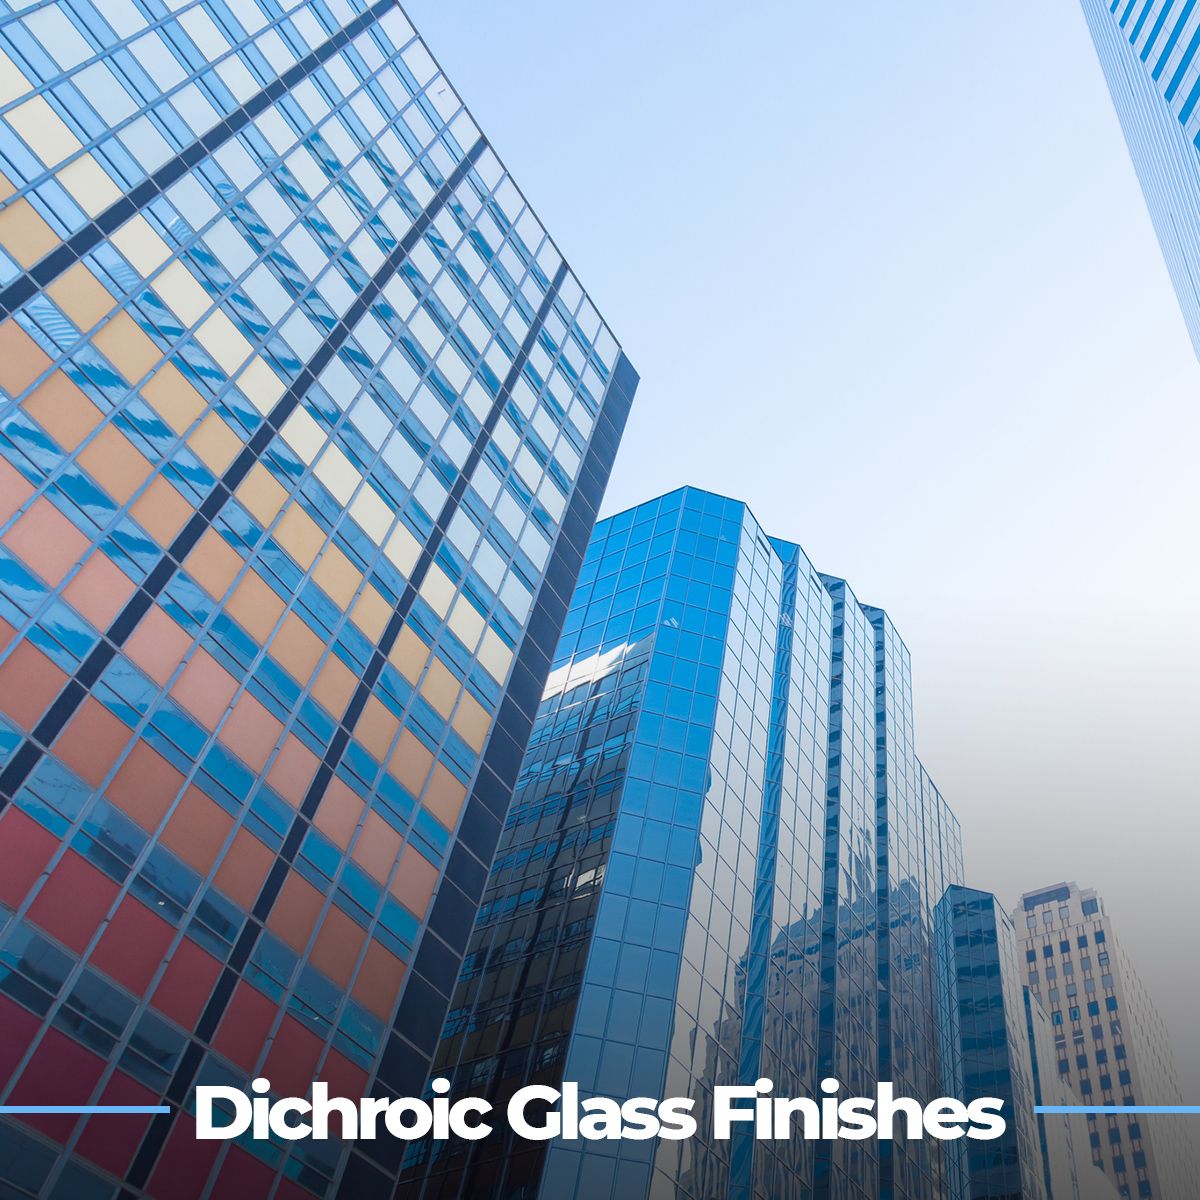 Dichroic Glass Finishes